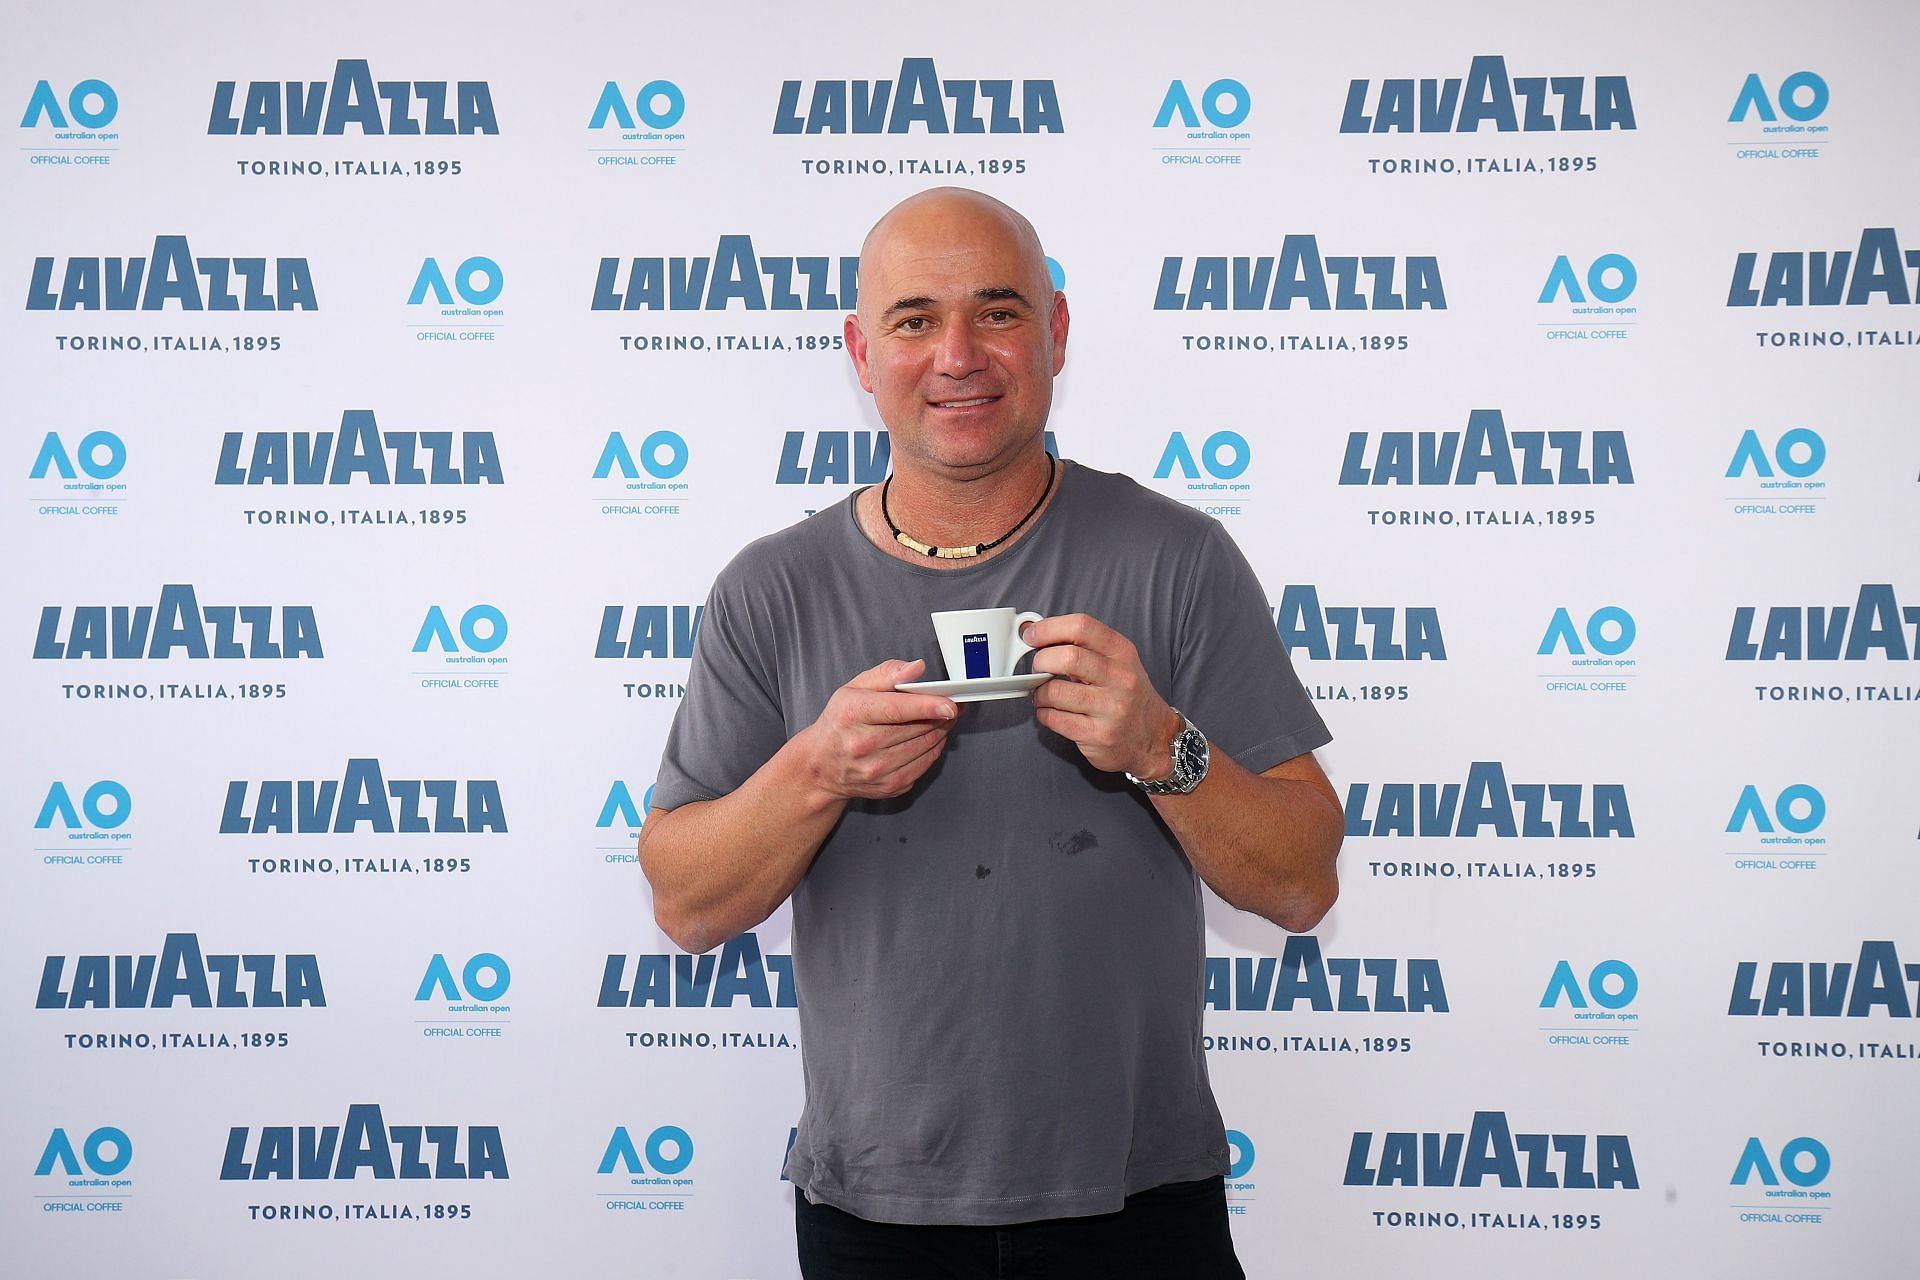 Andre Agassi at the 2019 Australian Open.